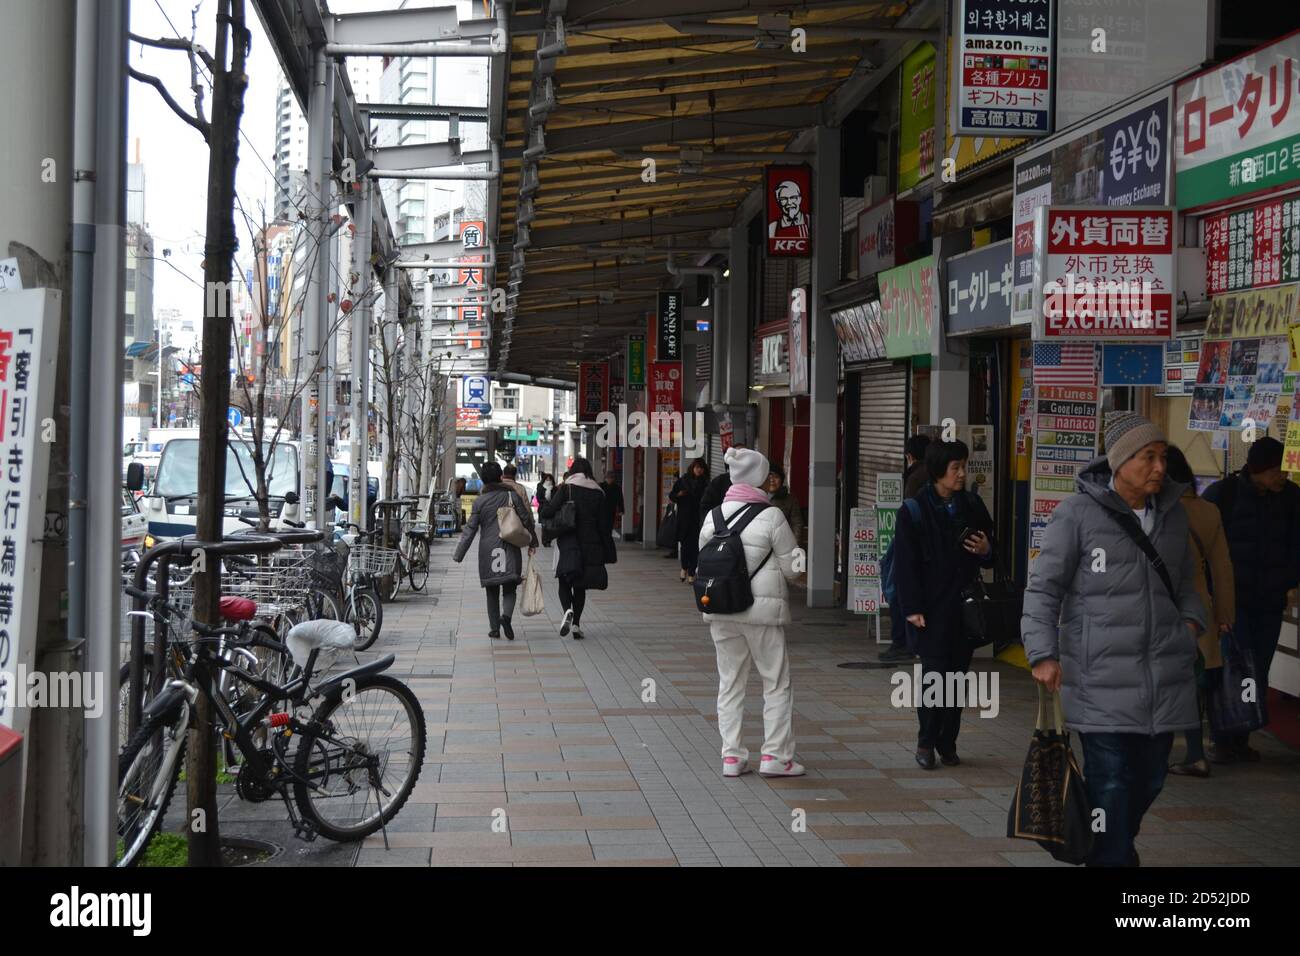 Tokyo, Japan-2/24/16: Daily life in Tokyo, people walking down the streets doing various things; on the right we see multiple shops, restaurants, etc. Stock Photo